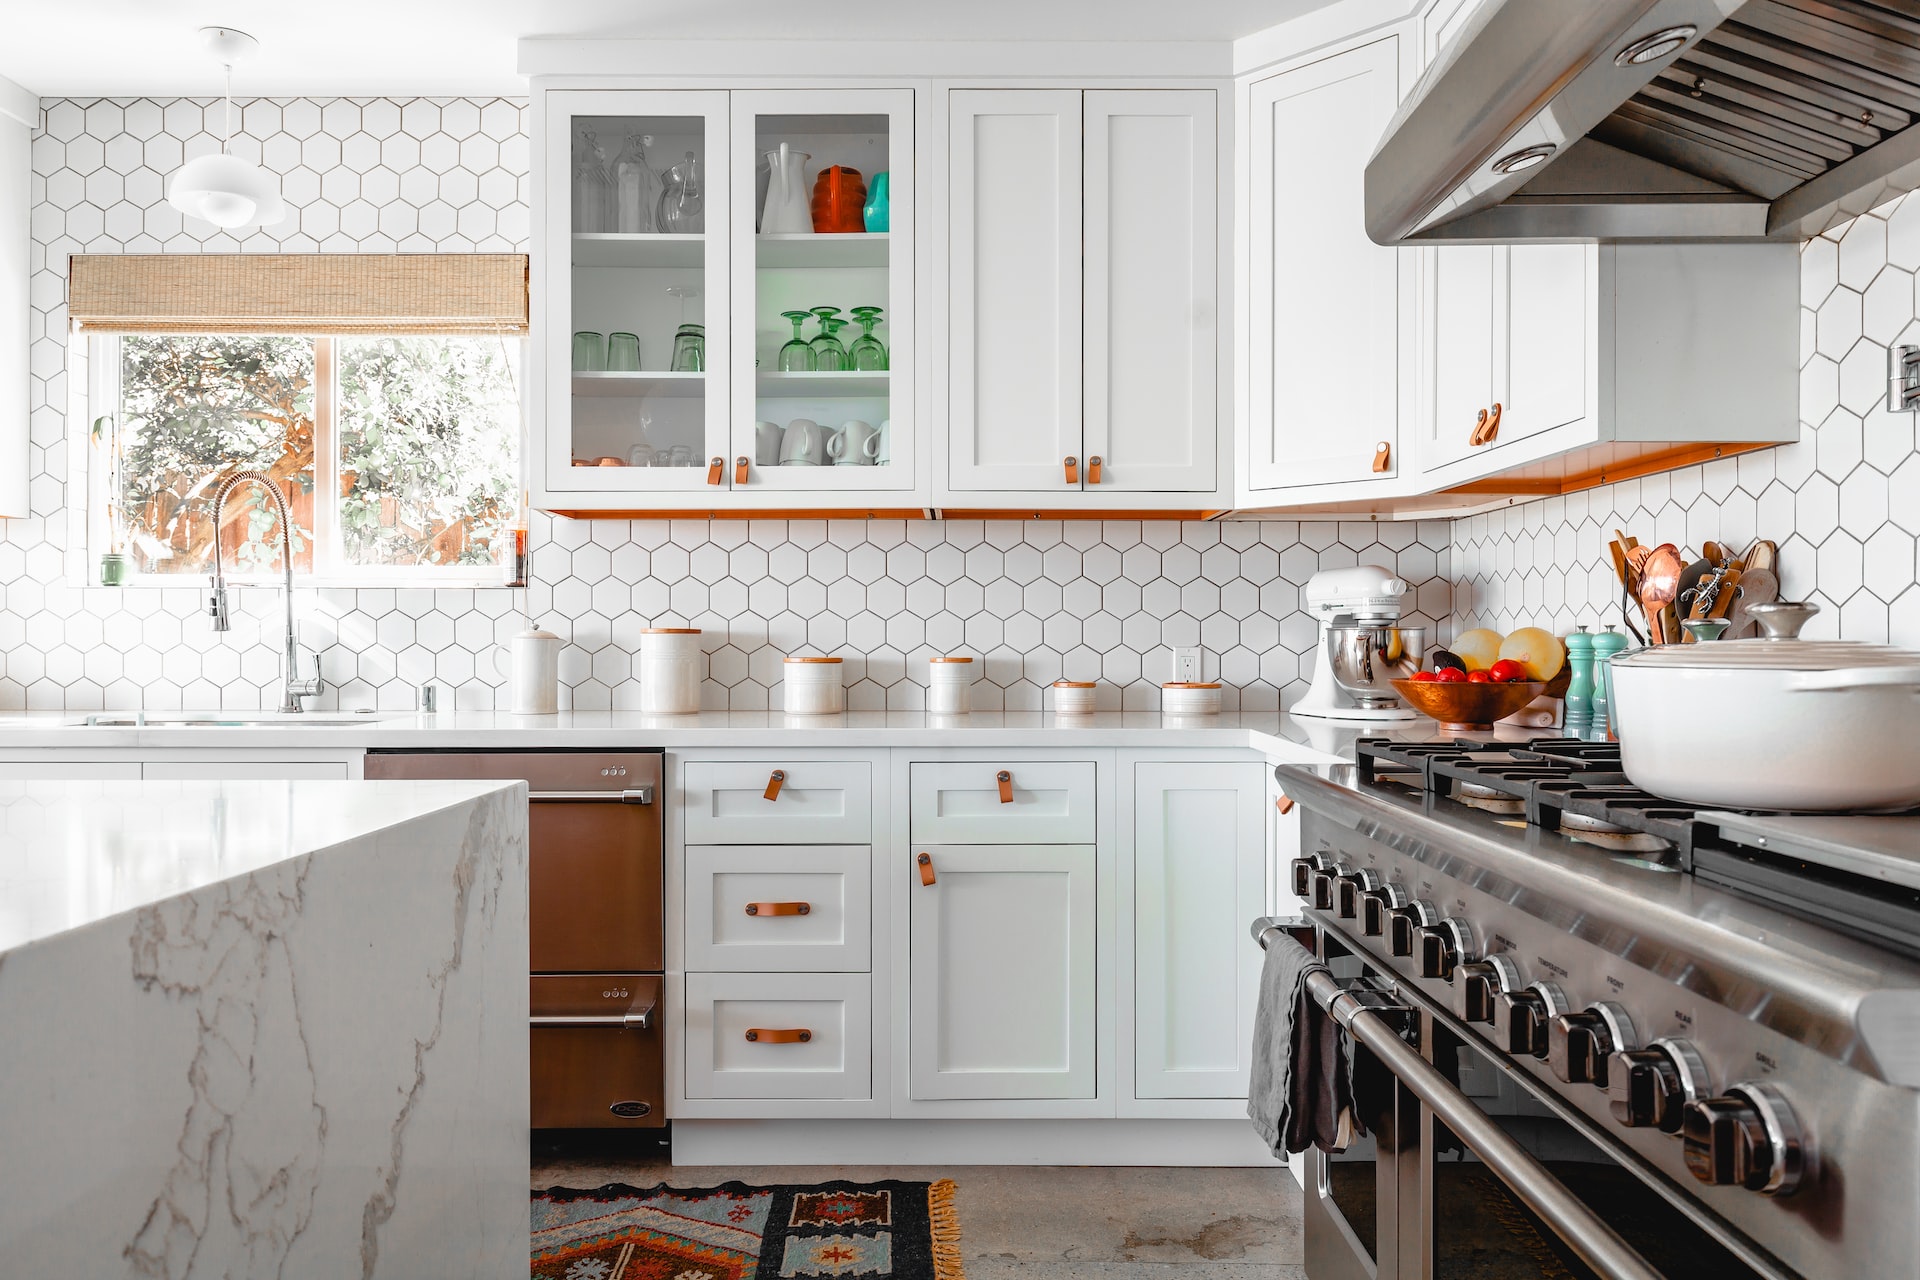 A kitchen that has incorporated marble and hexagon tiles into its design